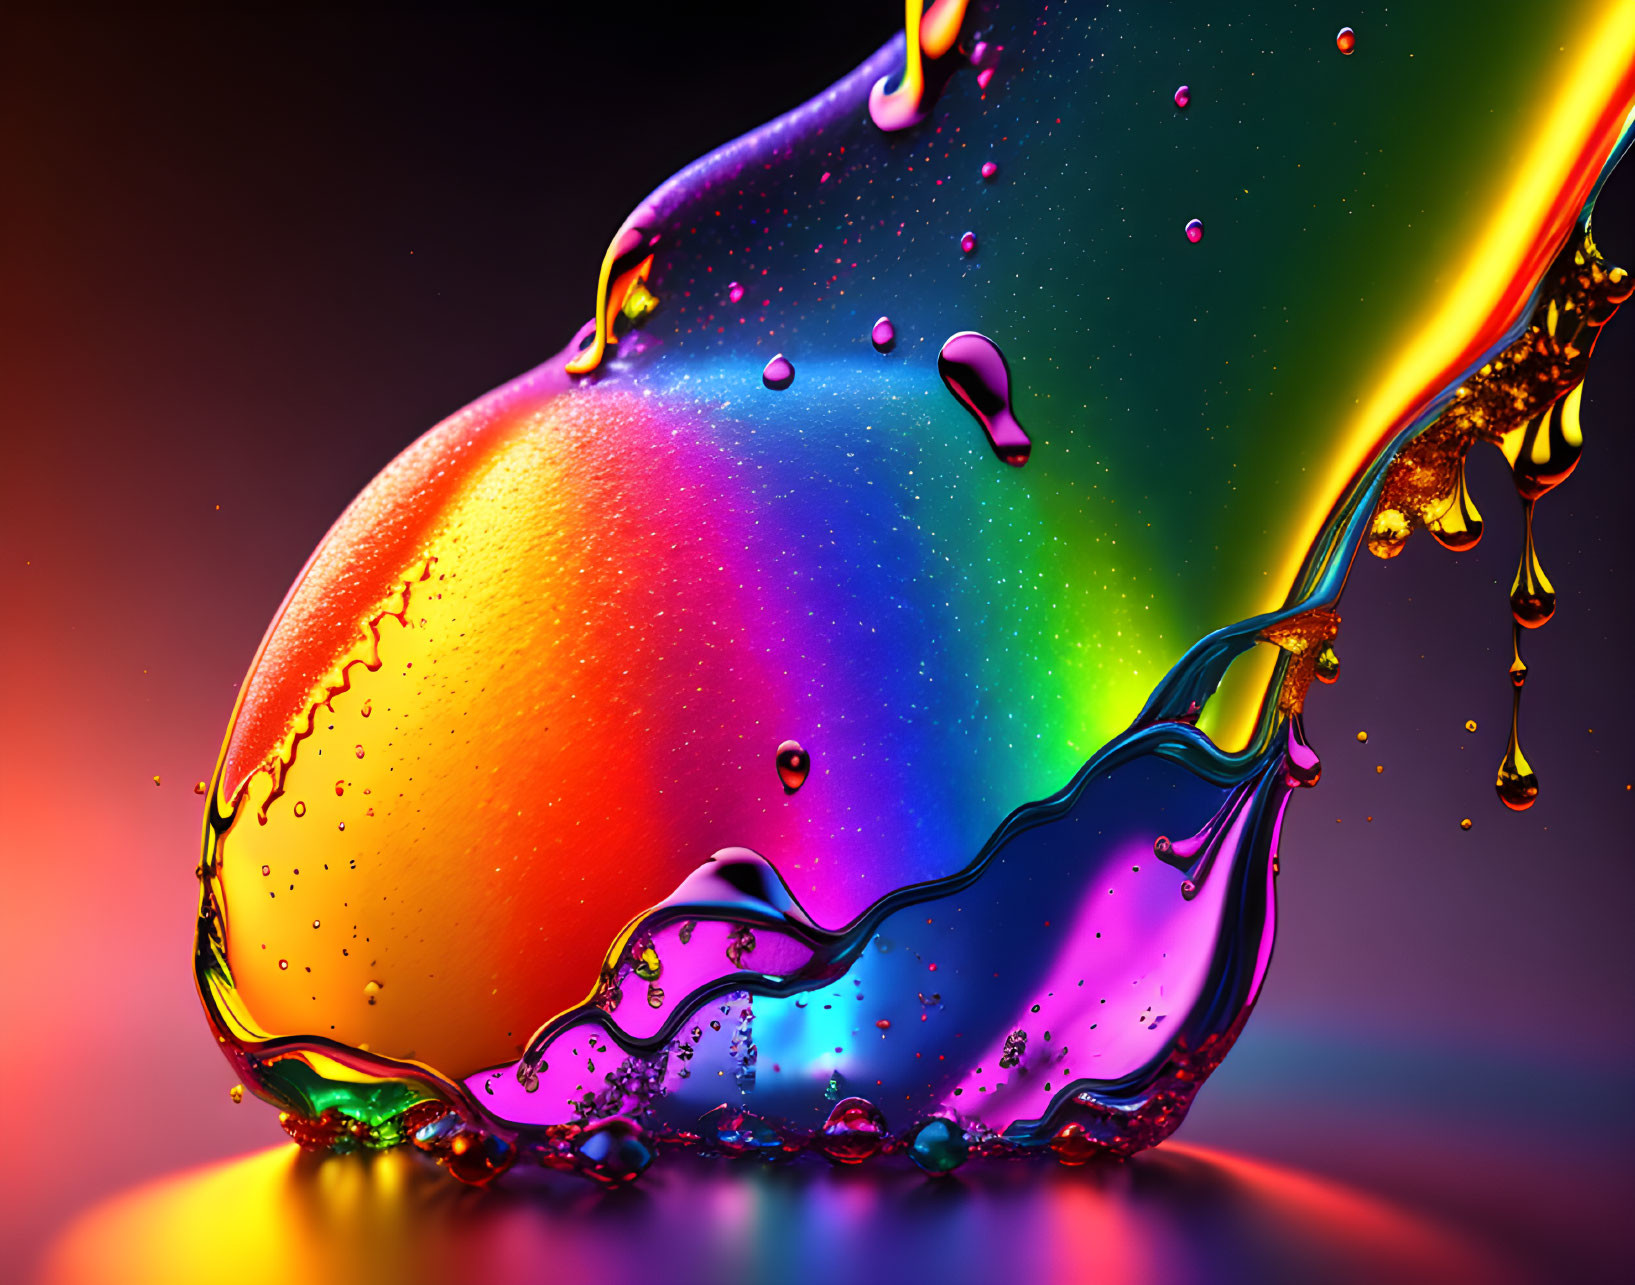 Colorful liquid splash on warm background with suspended droplets.